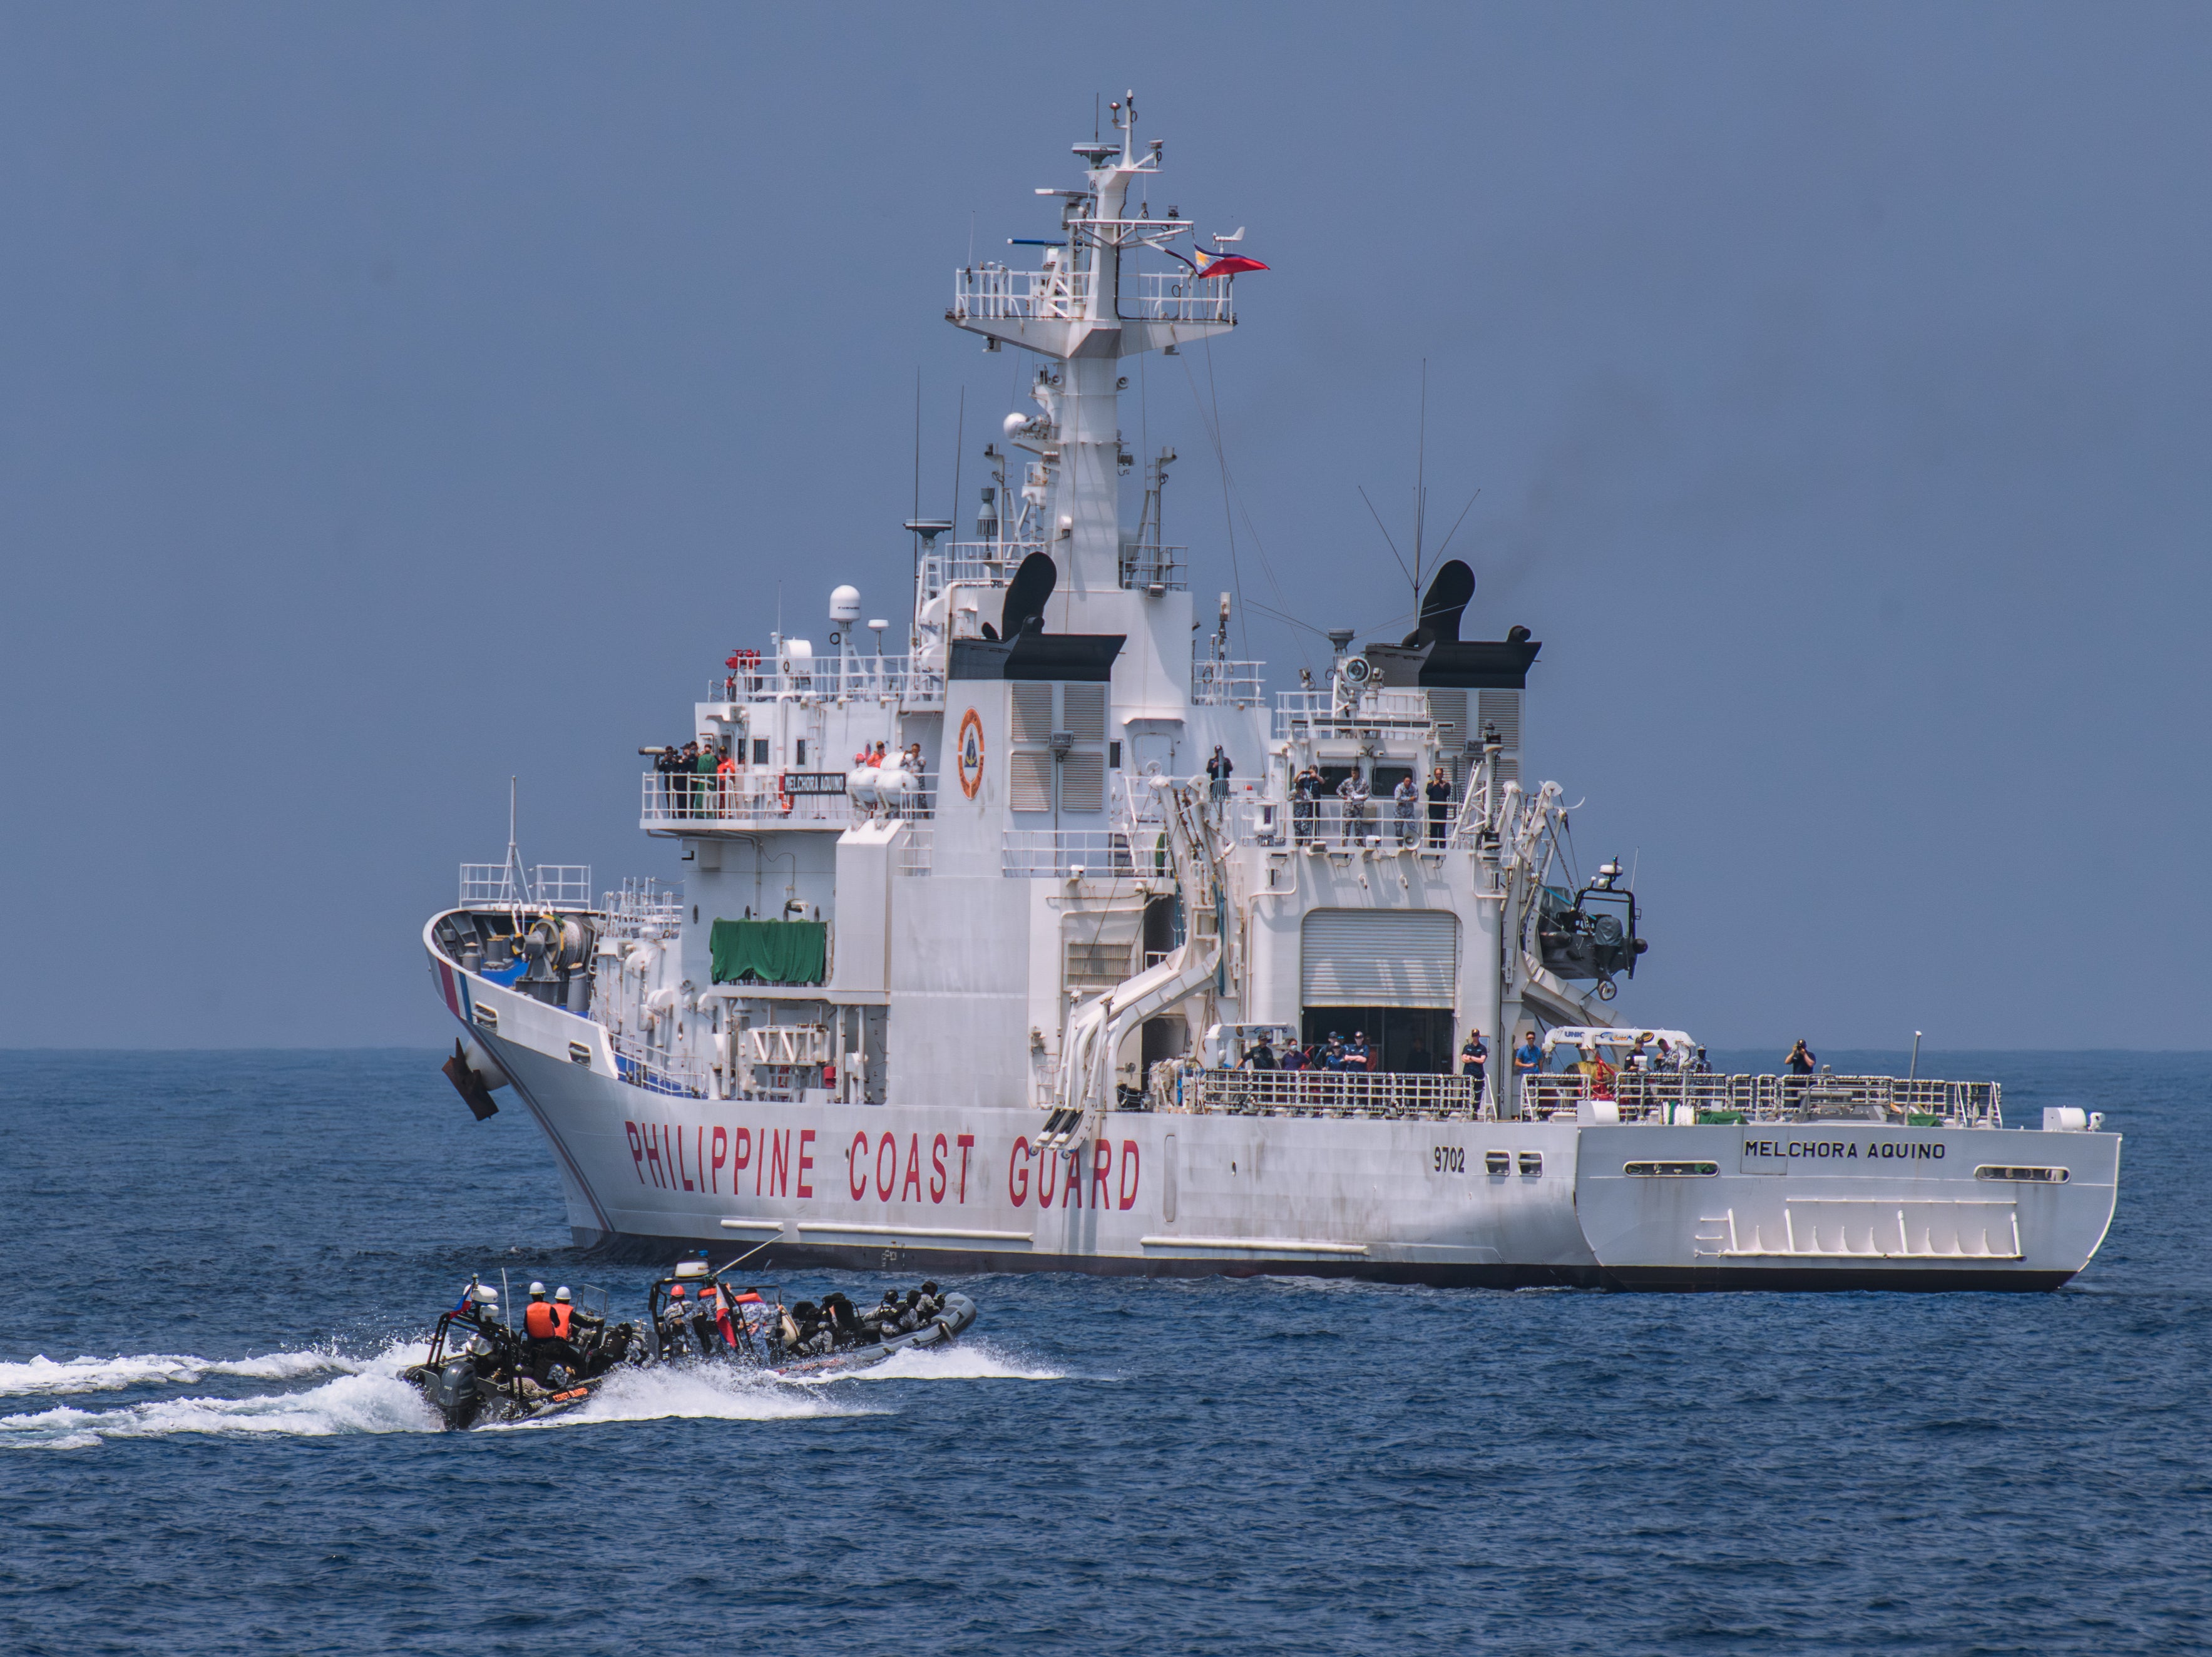 File. Members of the Philippine Coast Guard take part in a simulation during a trilateral maritime exercise with Japan and USA coast guard on 6 June 2023, 15 nautical miles off the coast of Bataan province, western Philippines. The drills that took place in waters facing South China Sea included maneuverings, maritime law enforcement, and search and rescue at sea